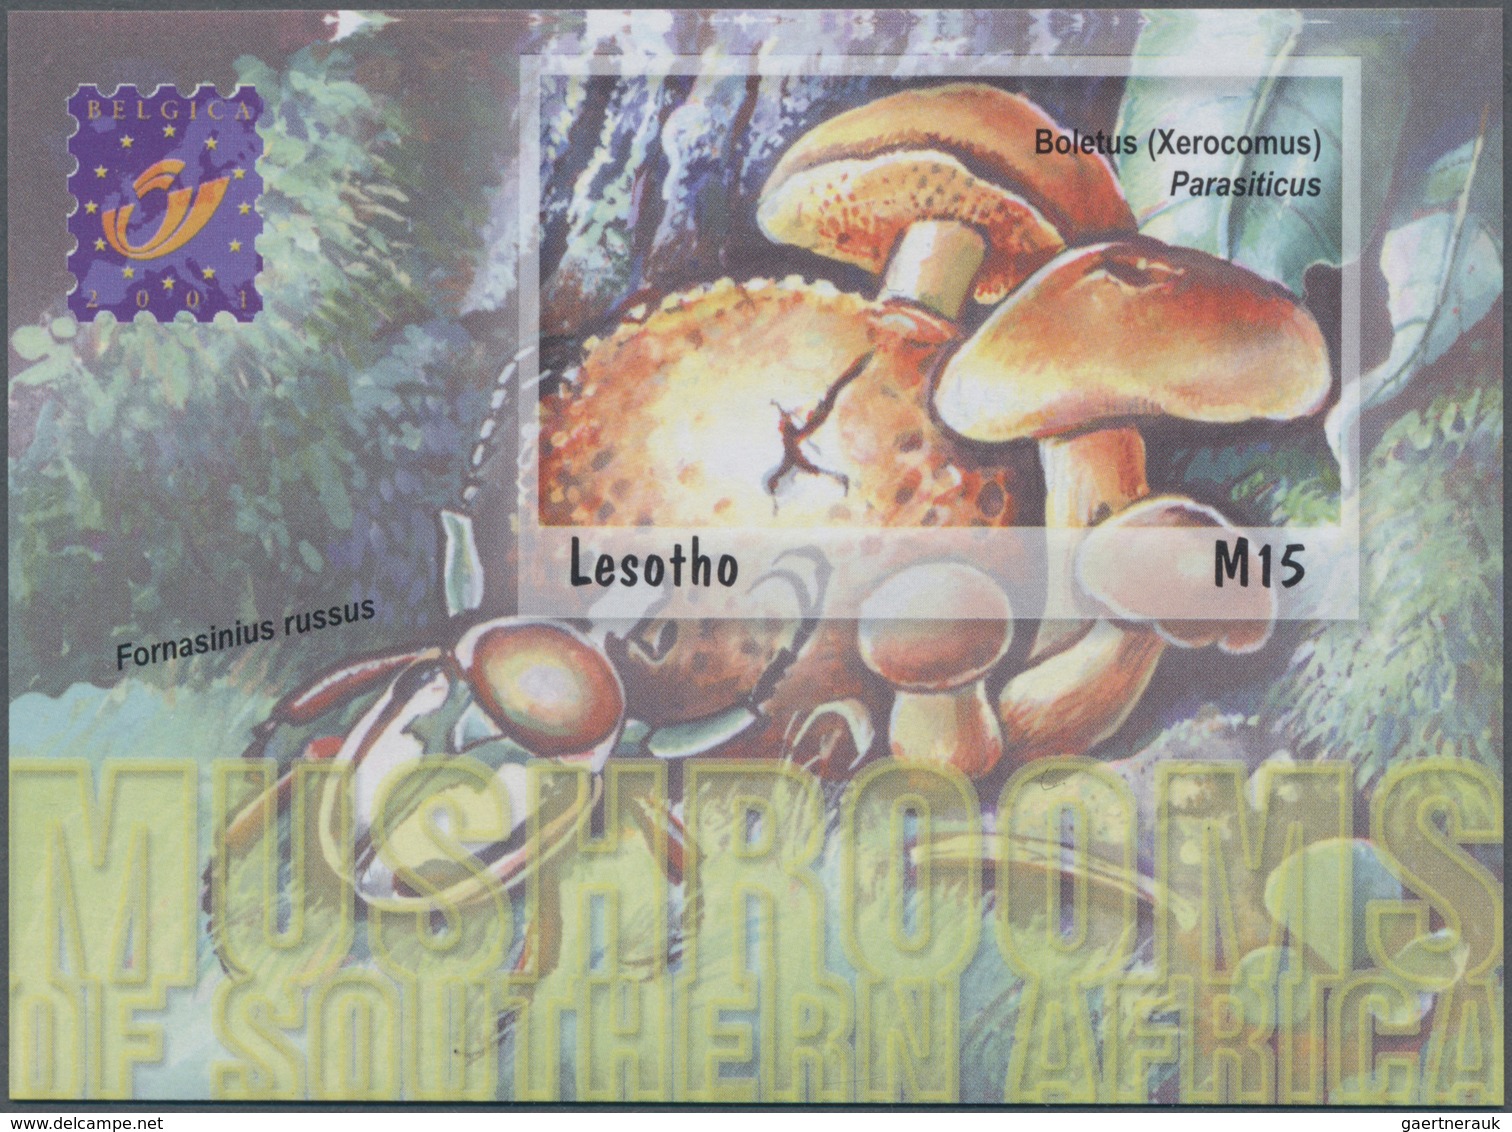 Thematik: Pilze / Mushrooms: 2001, Lesotho. Imperforate Souvenir Sheet (1 Value) From The Issue "Mus - Mushrooms